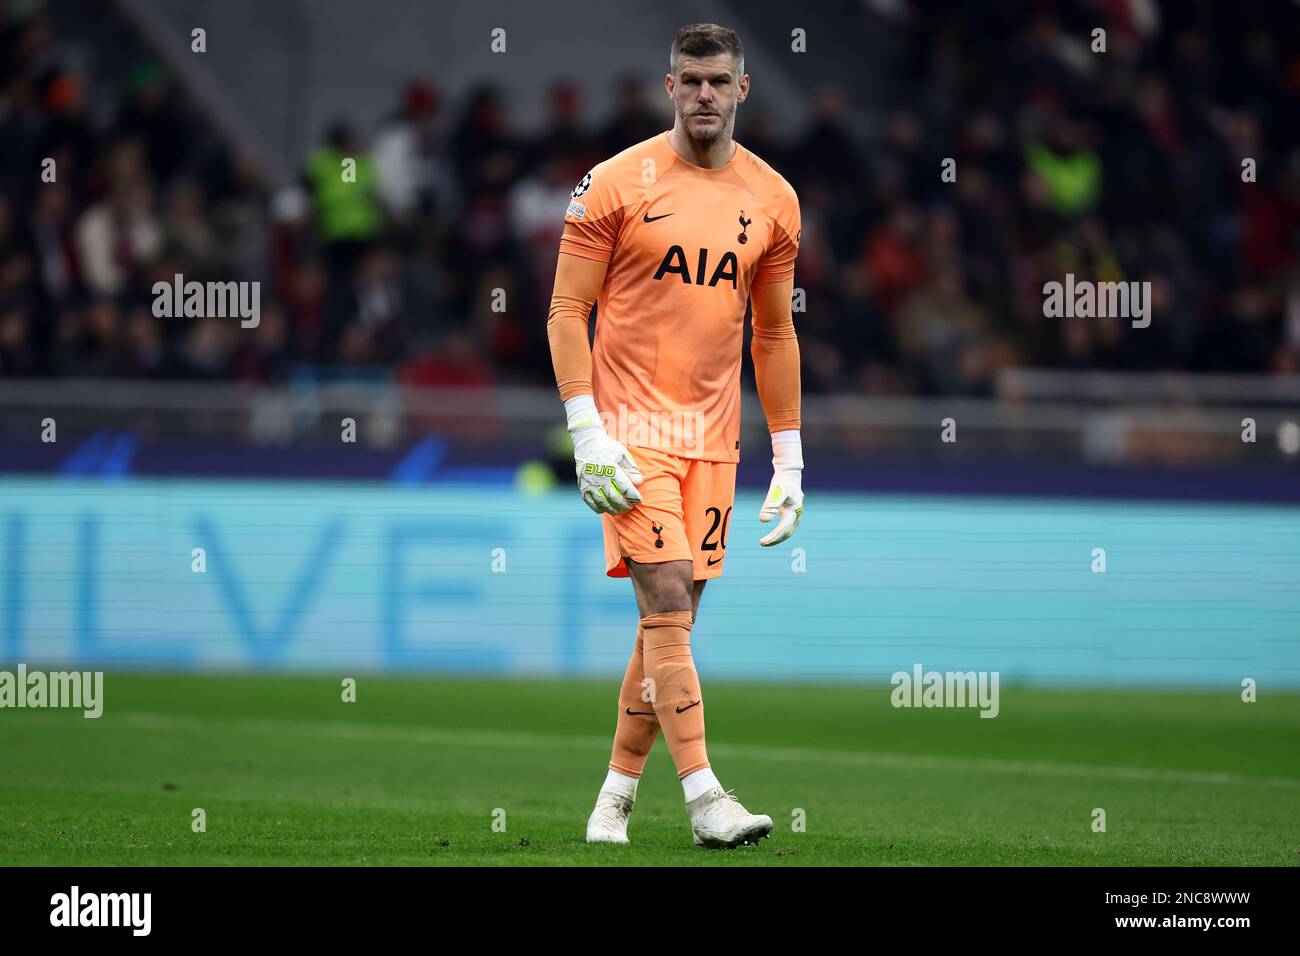 Milan, Italy. February 14, 2023, Milan, Italy. 14/02/2023, Fraser Forster of Tottenham Hotspur Fc looks on during the UEFA Champions League round of 16 first leg match between AC Milan and Tottenham Hotspur Fc at Giuseppe Meazza Stadium on February 14, 2023 in Milan, Italy. Stock Photo